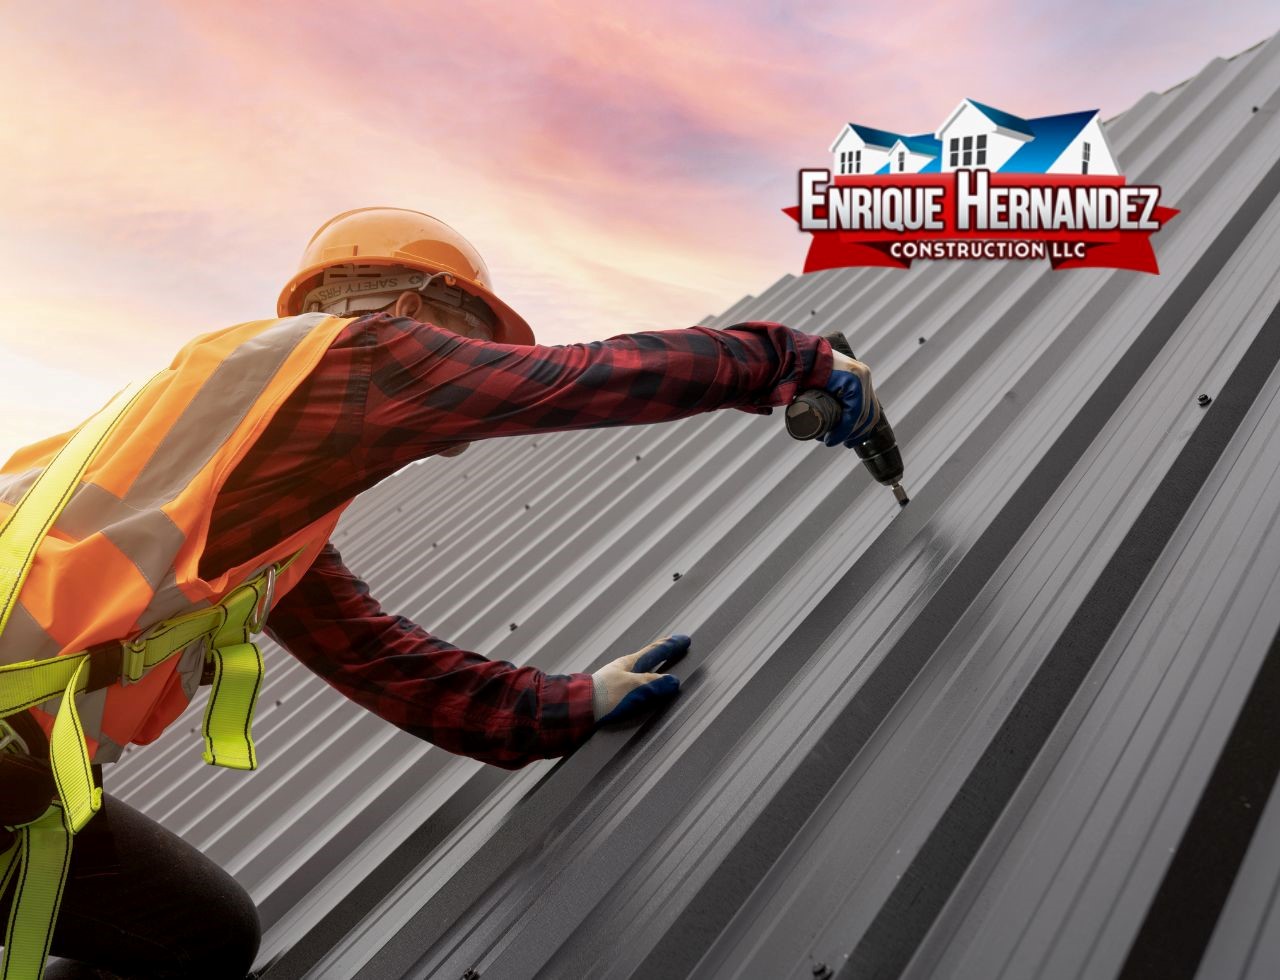 Contact Enrique Hernandez Construction LLC to provide you with metal roofing services.